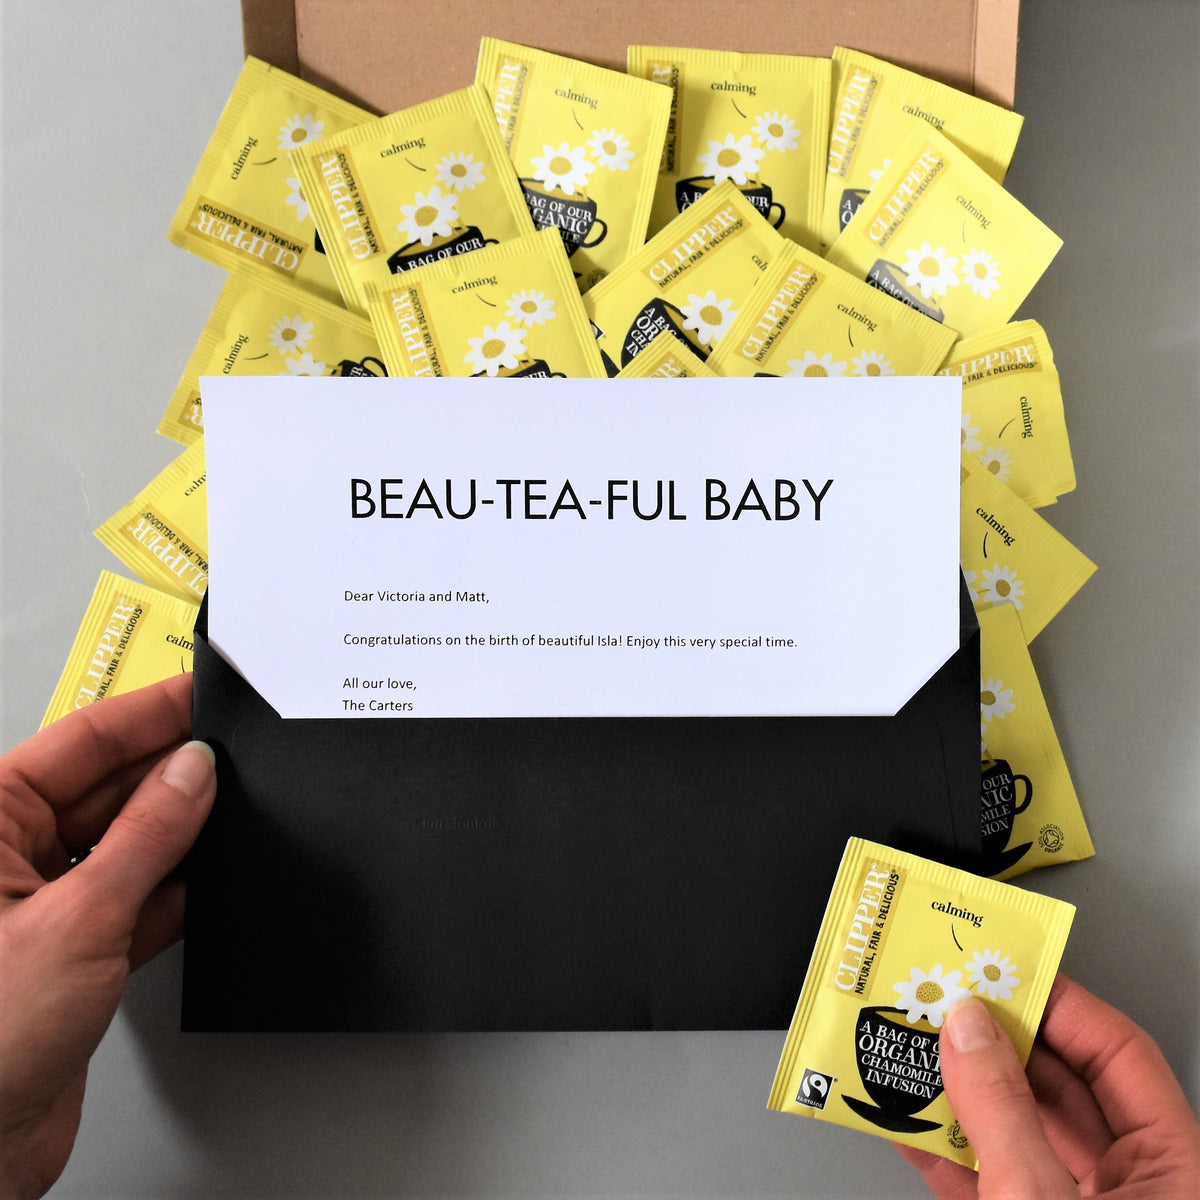 New Baby Tea Gift in Letterbox friendly packaging